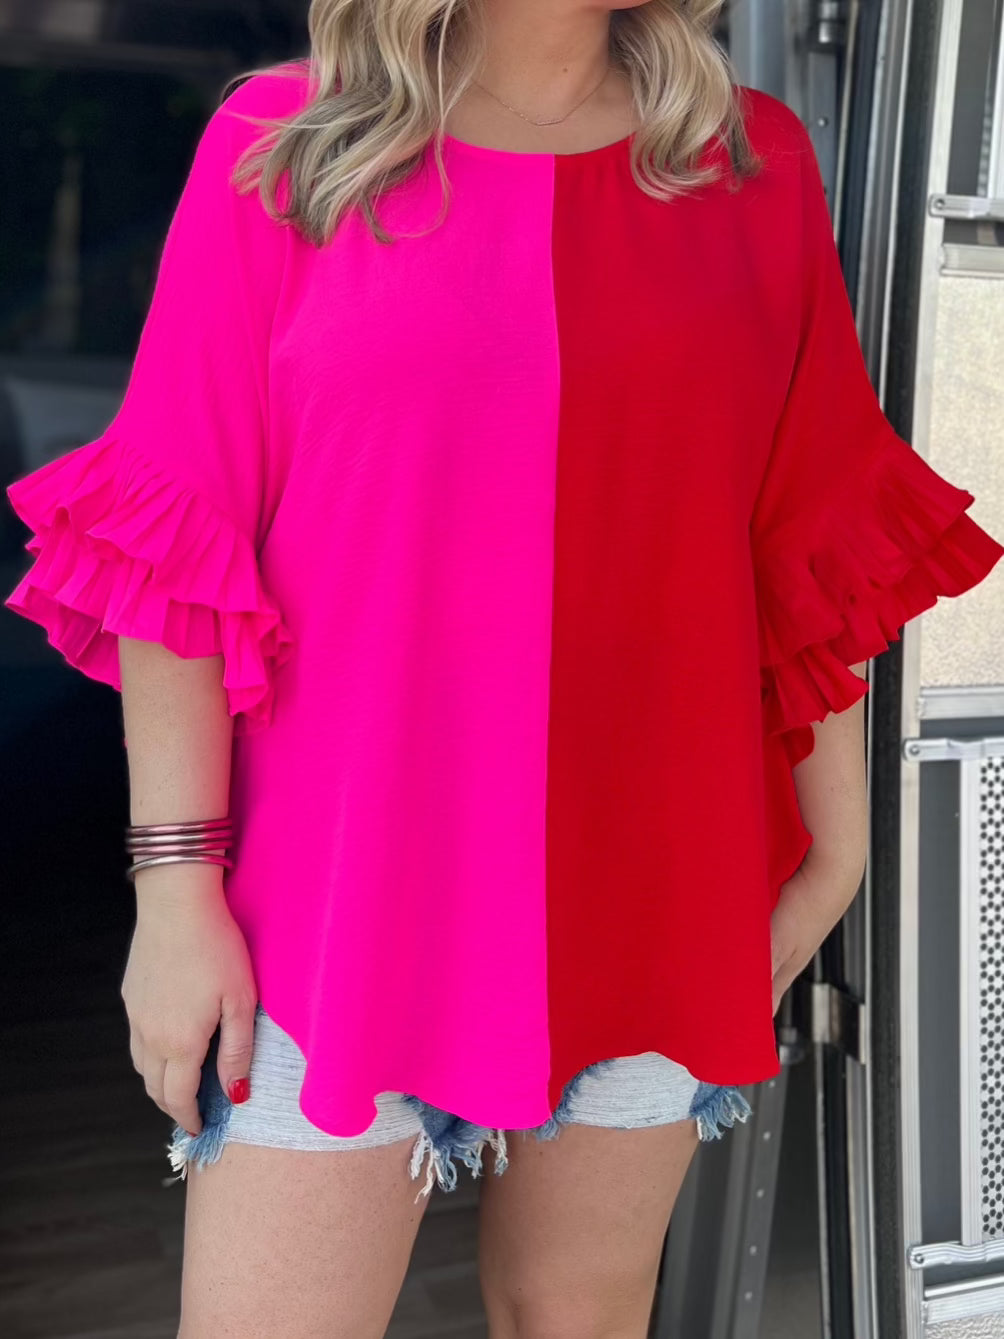 pink half red half top with ruffle sleeves